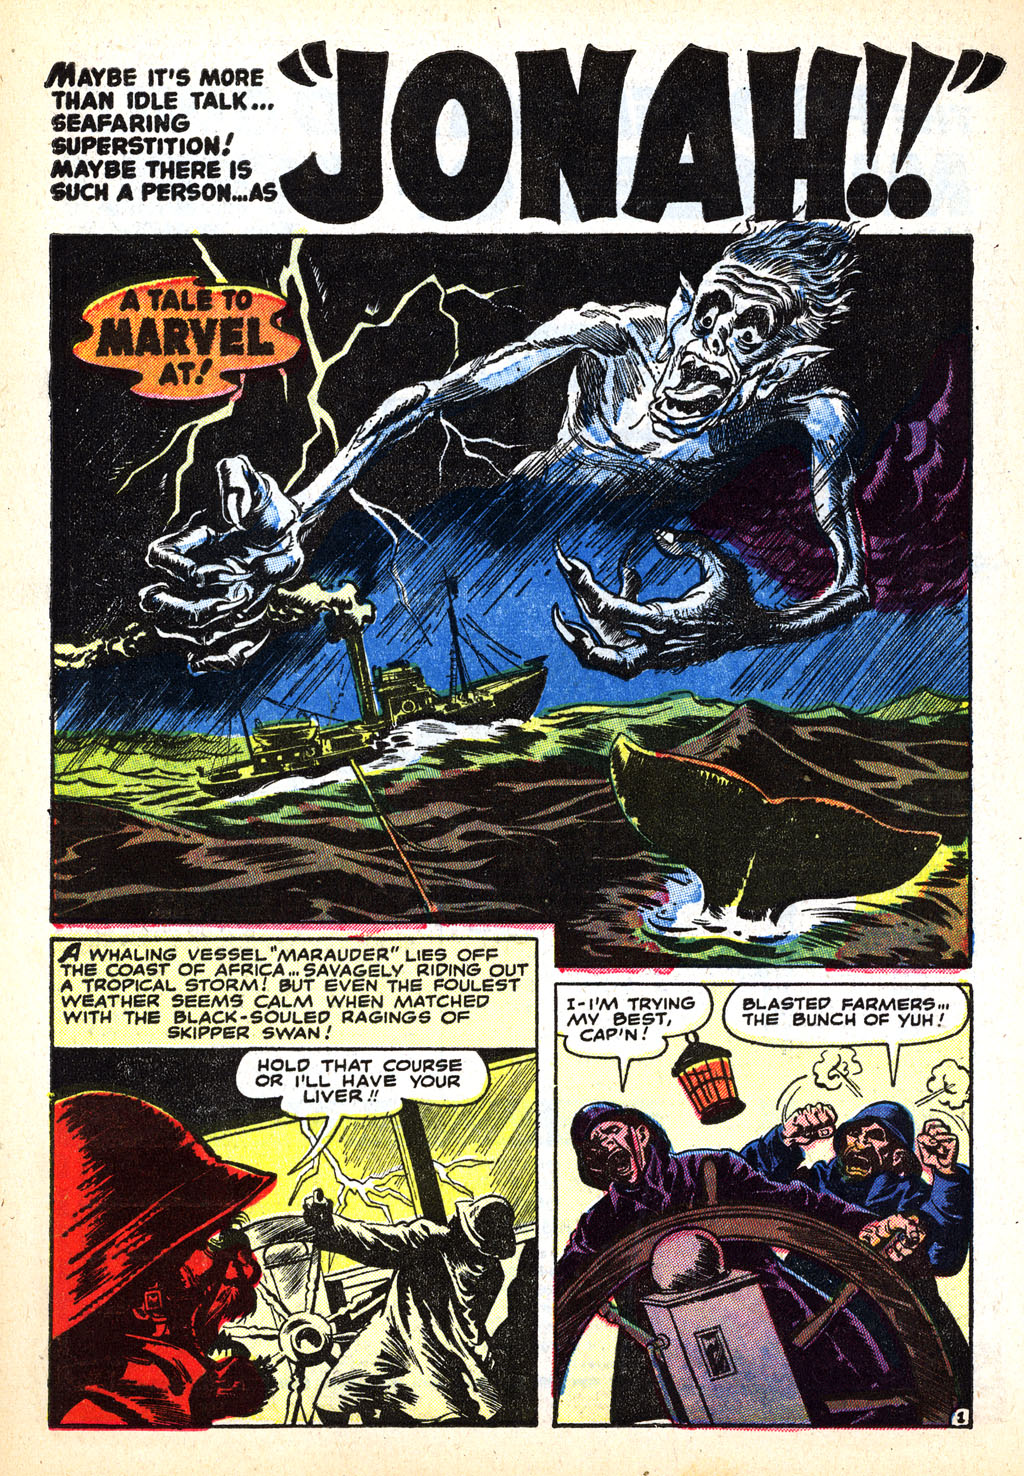 Marvel Tales (1949) 112 Page 11